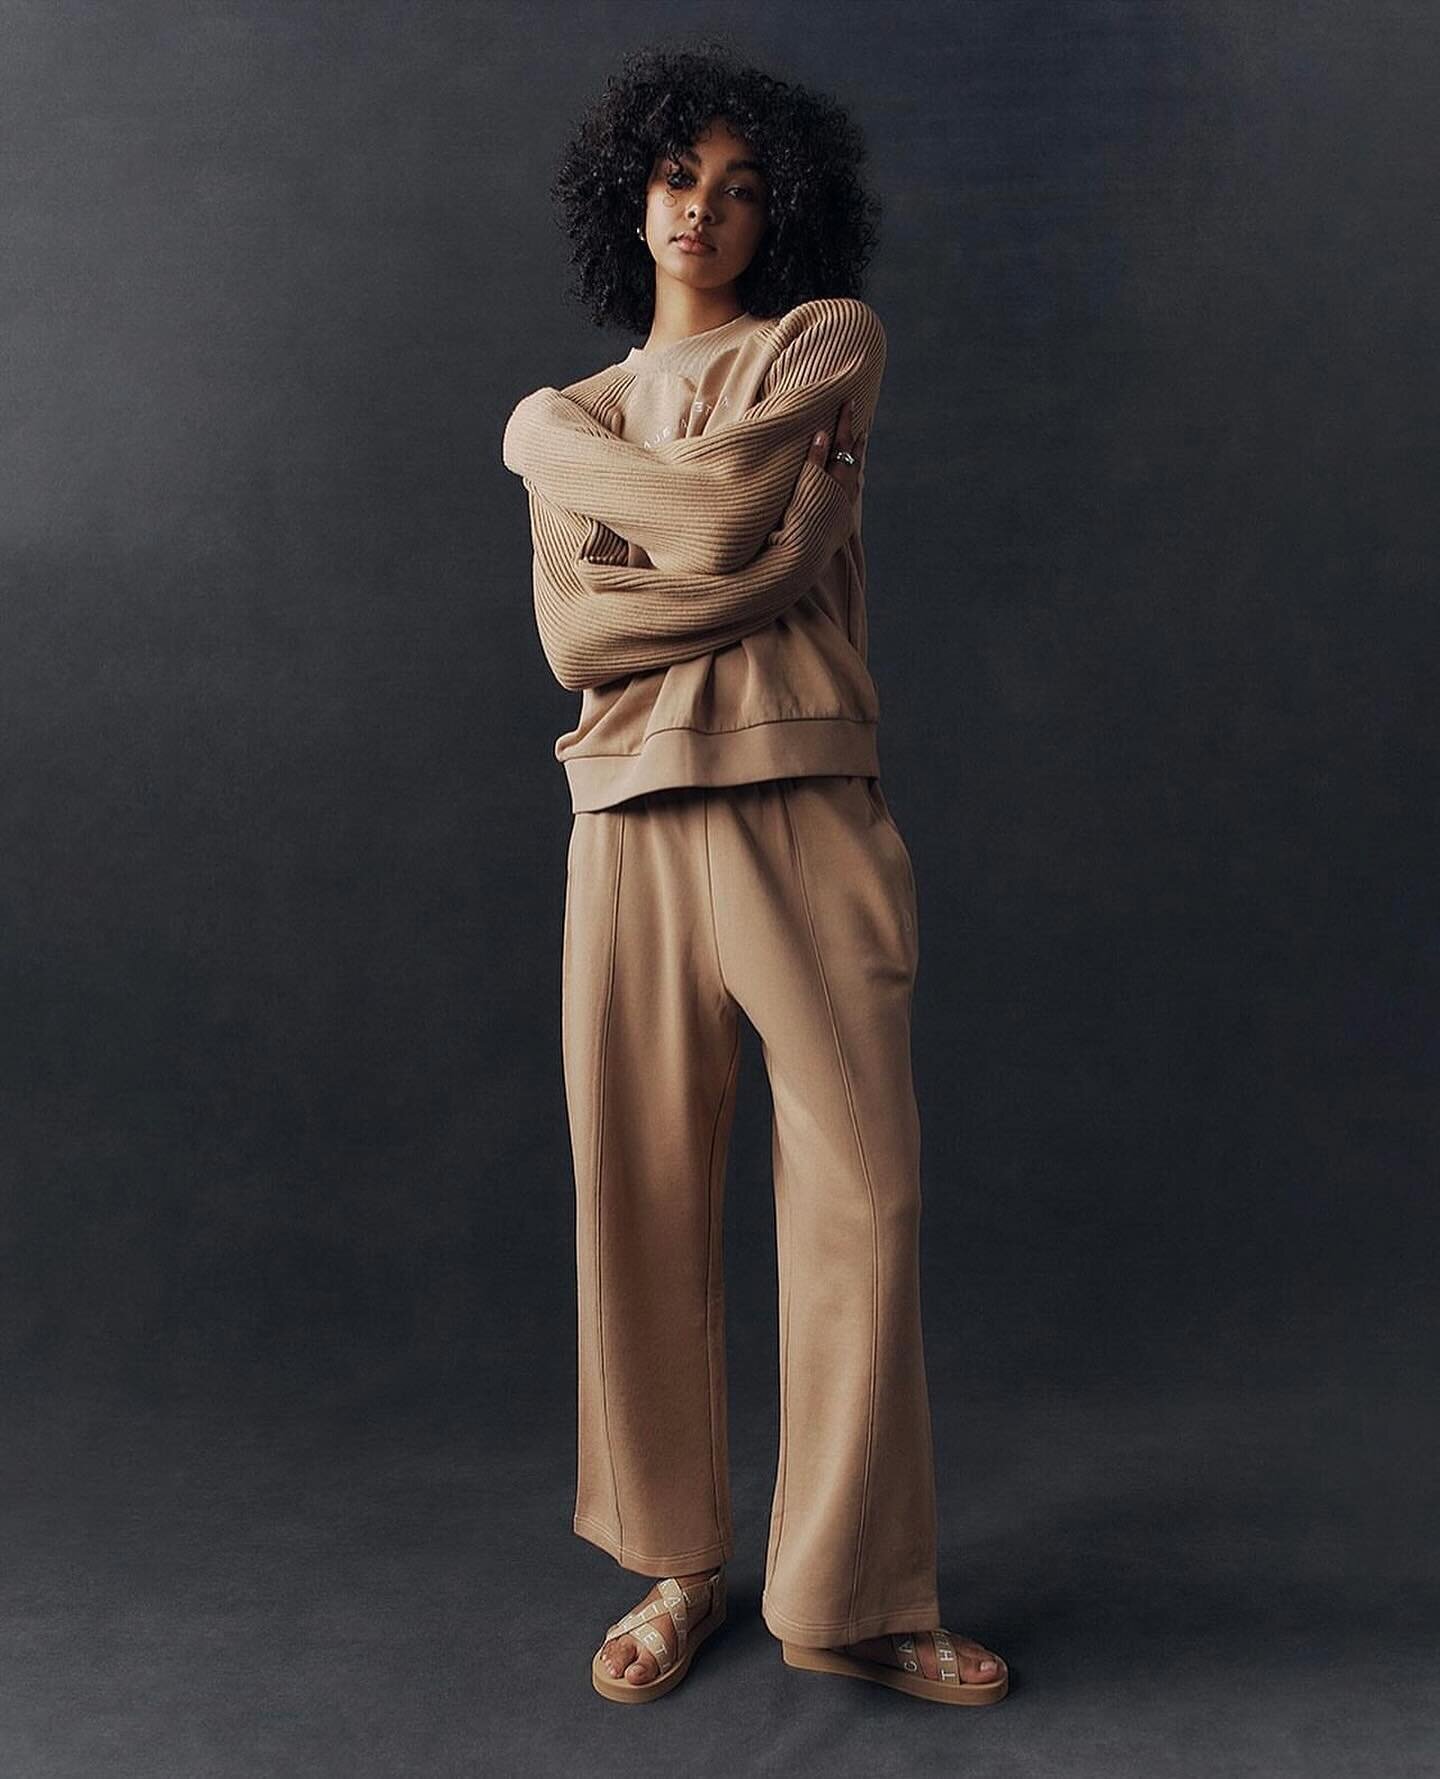 @ajeathletica The stunning Raglan Contrast Knit Crew Sweater and Pin tuck Wide Leg Track pant sourced by us!💛💛💛

#highquality #production #quantity #luxury #fashion #fashion #activewear #fashion #source #fashionagent